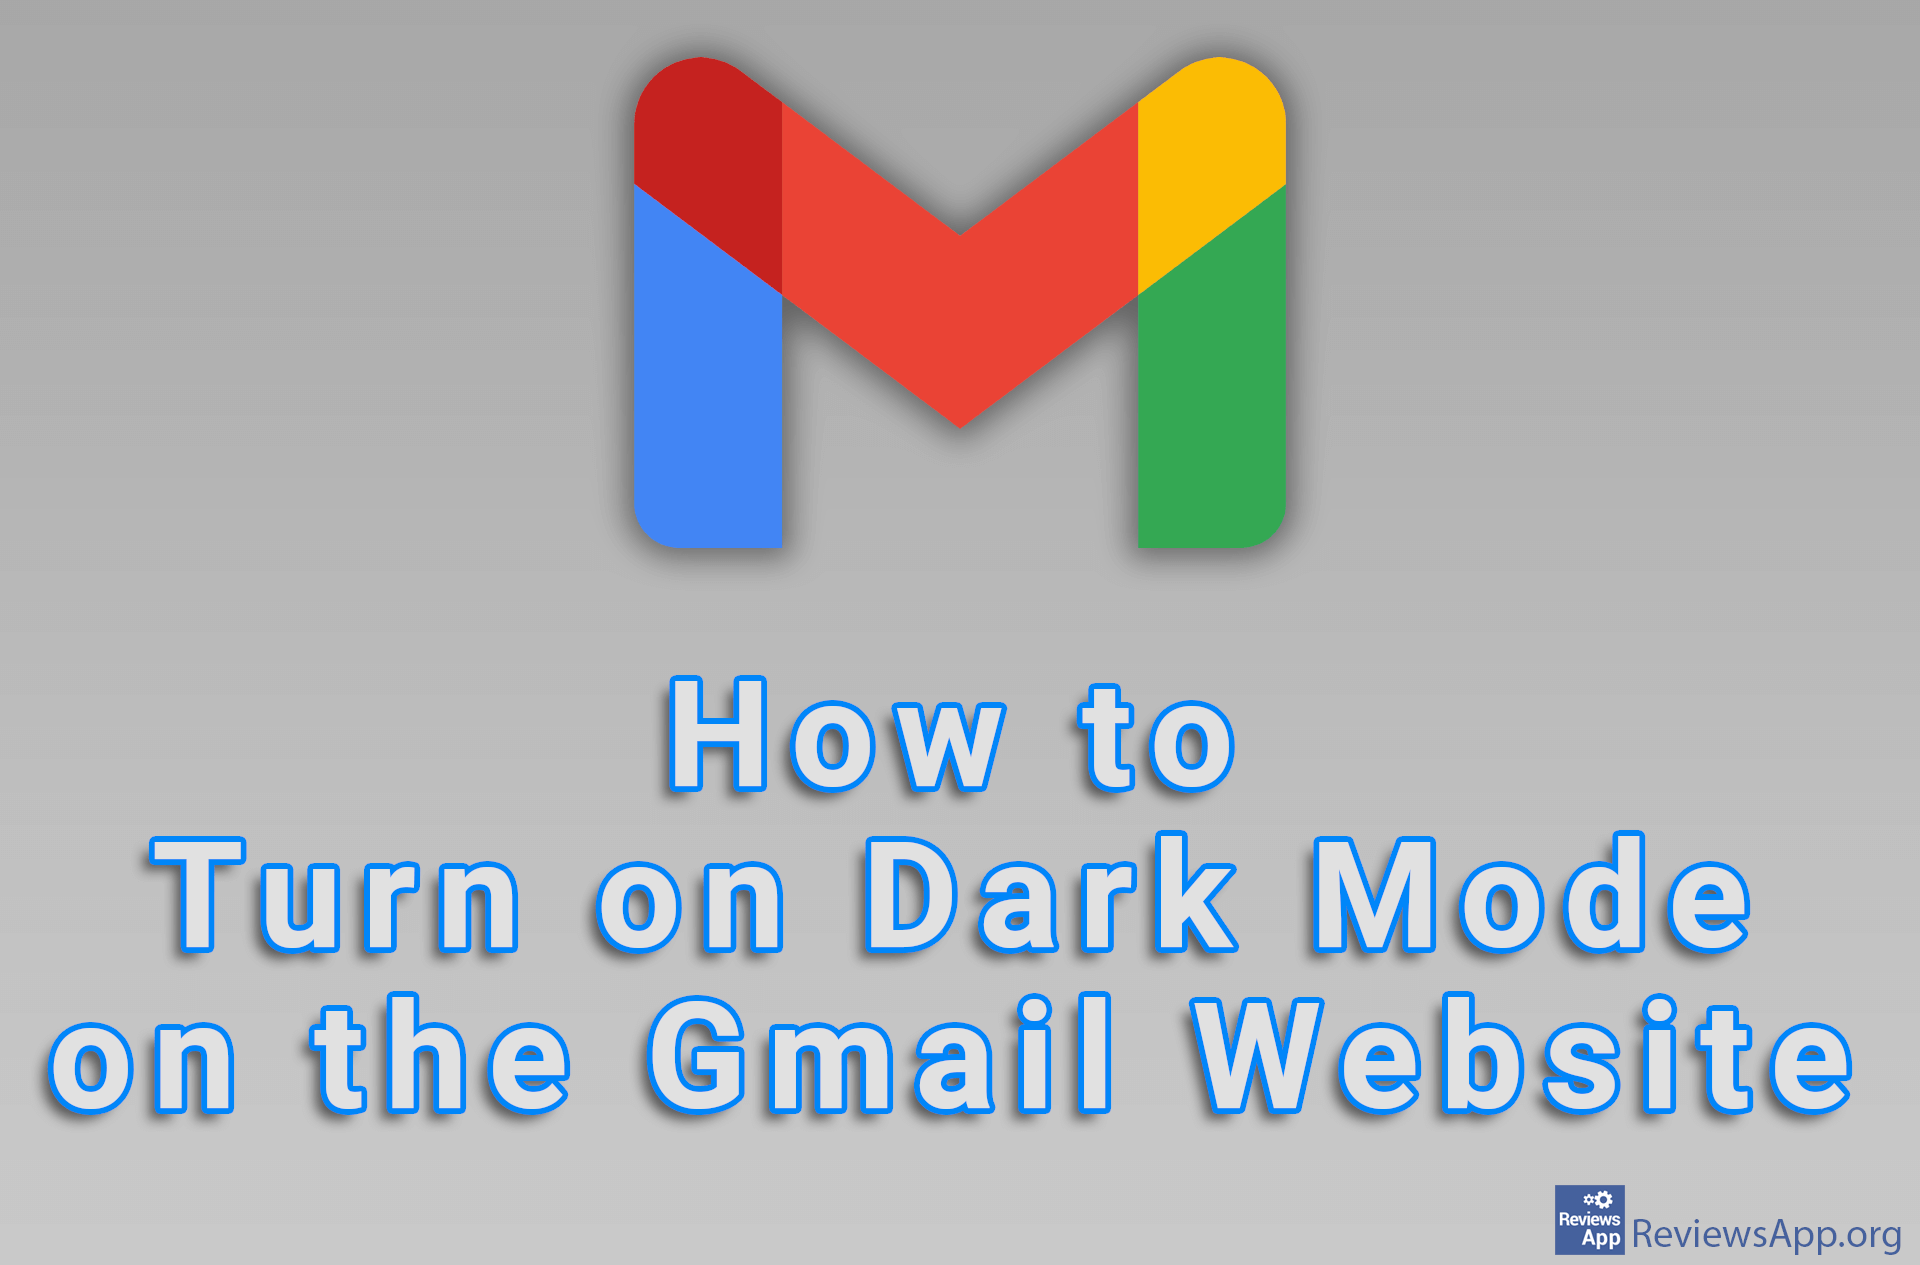 How to Turn on Dark Mode on the Gmail Website